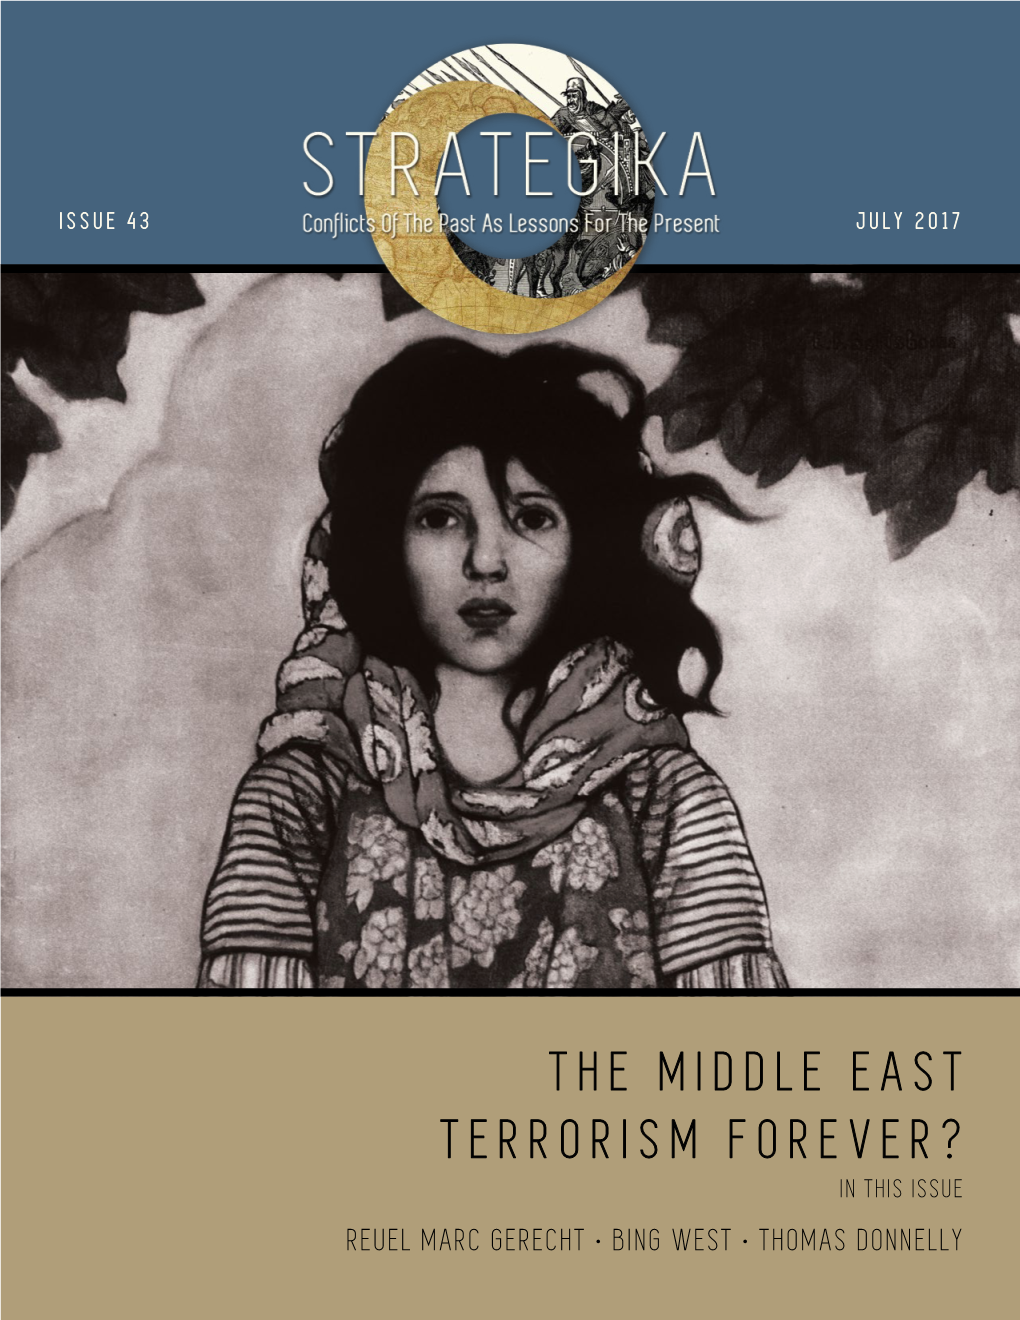 The Middle East Terrorism Forever?